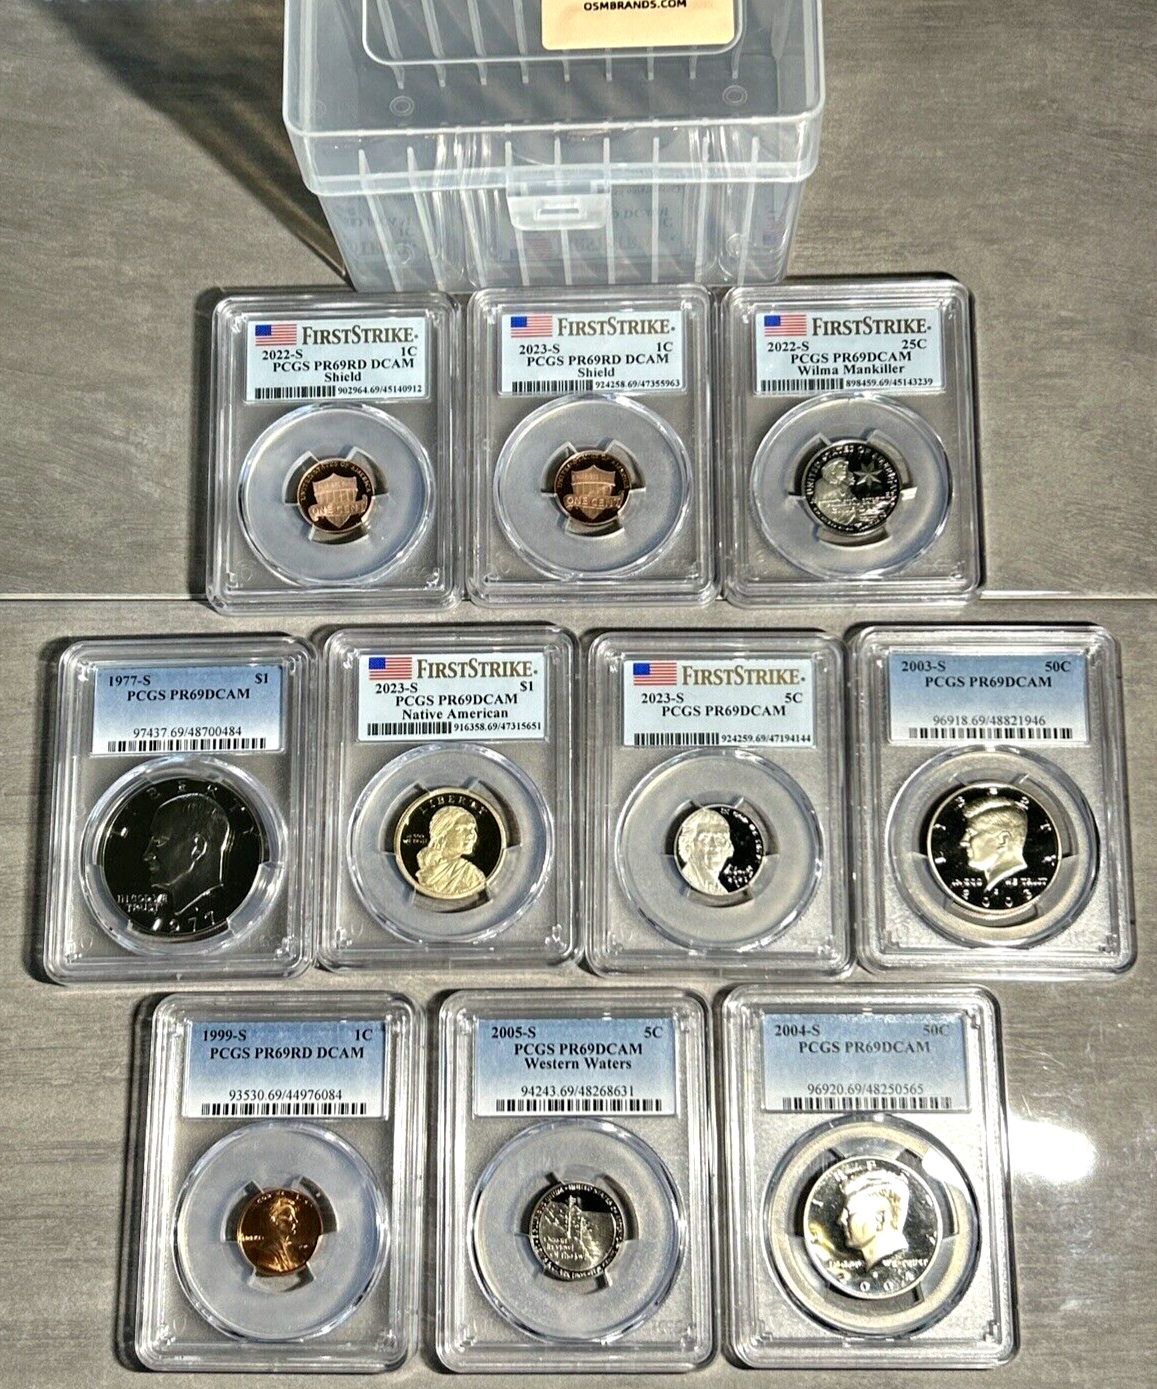 Buy PCGS Certified Coins on eBay